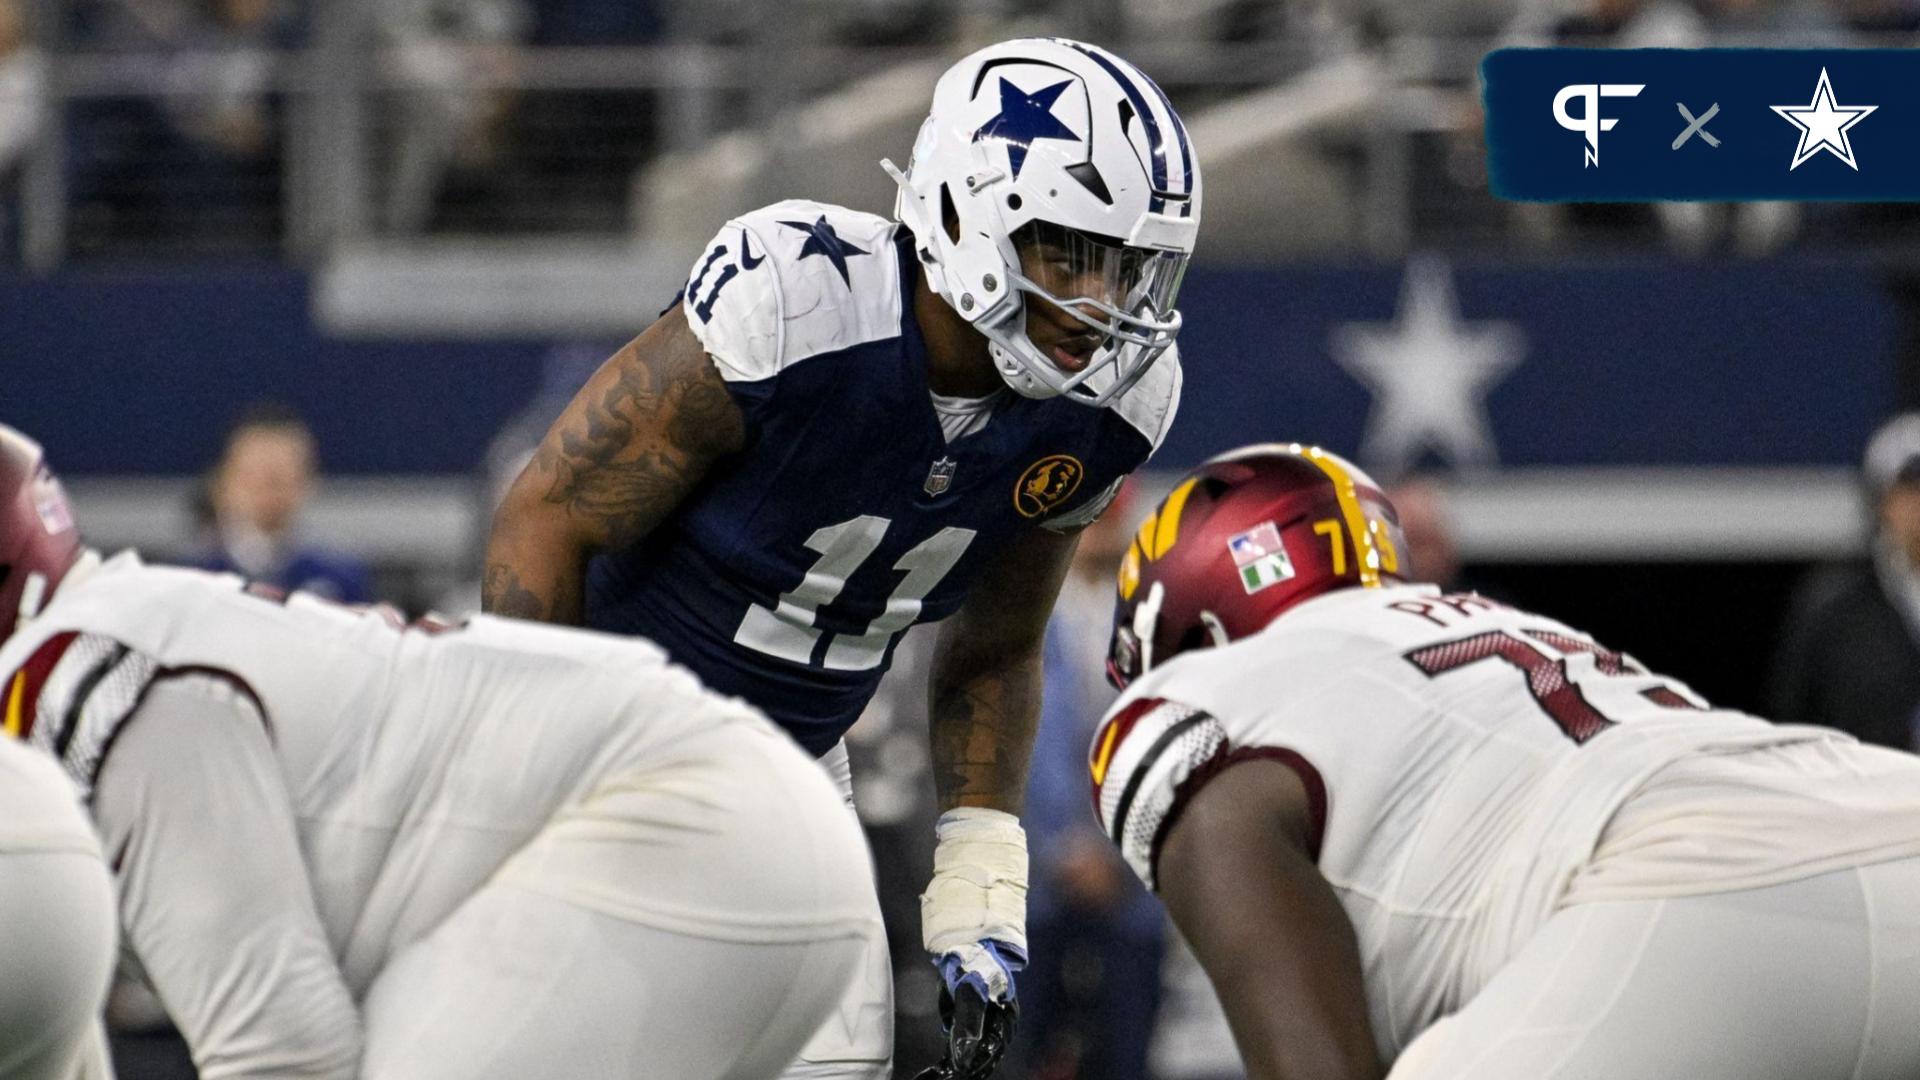 Dallas Cowboys linebacker Micah Parsons (11) in action during the game between the Dallas Cowboys and the Washington Commanders at AT&T Stadium.